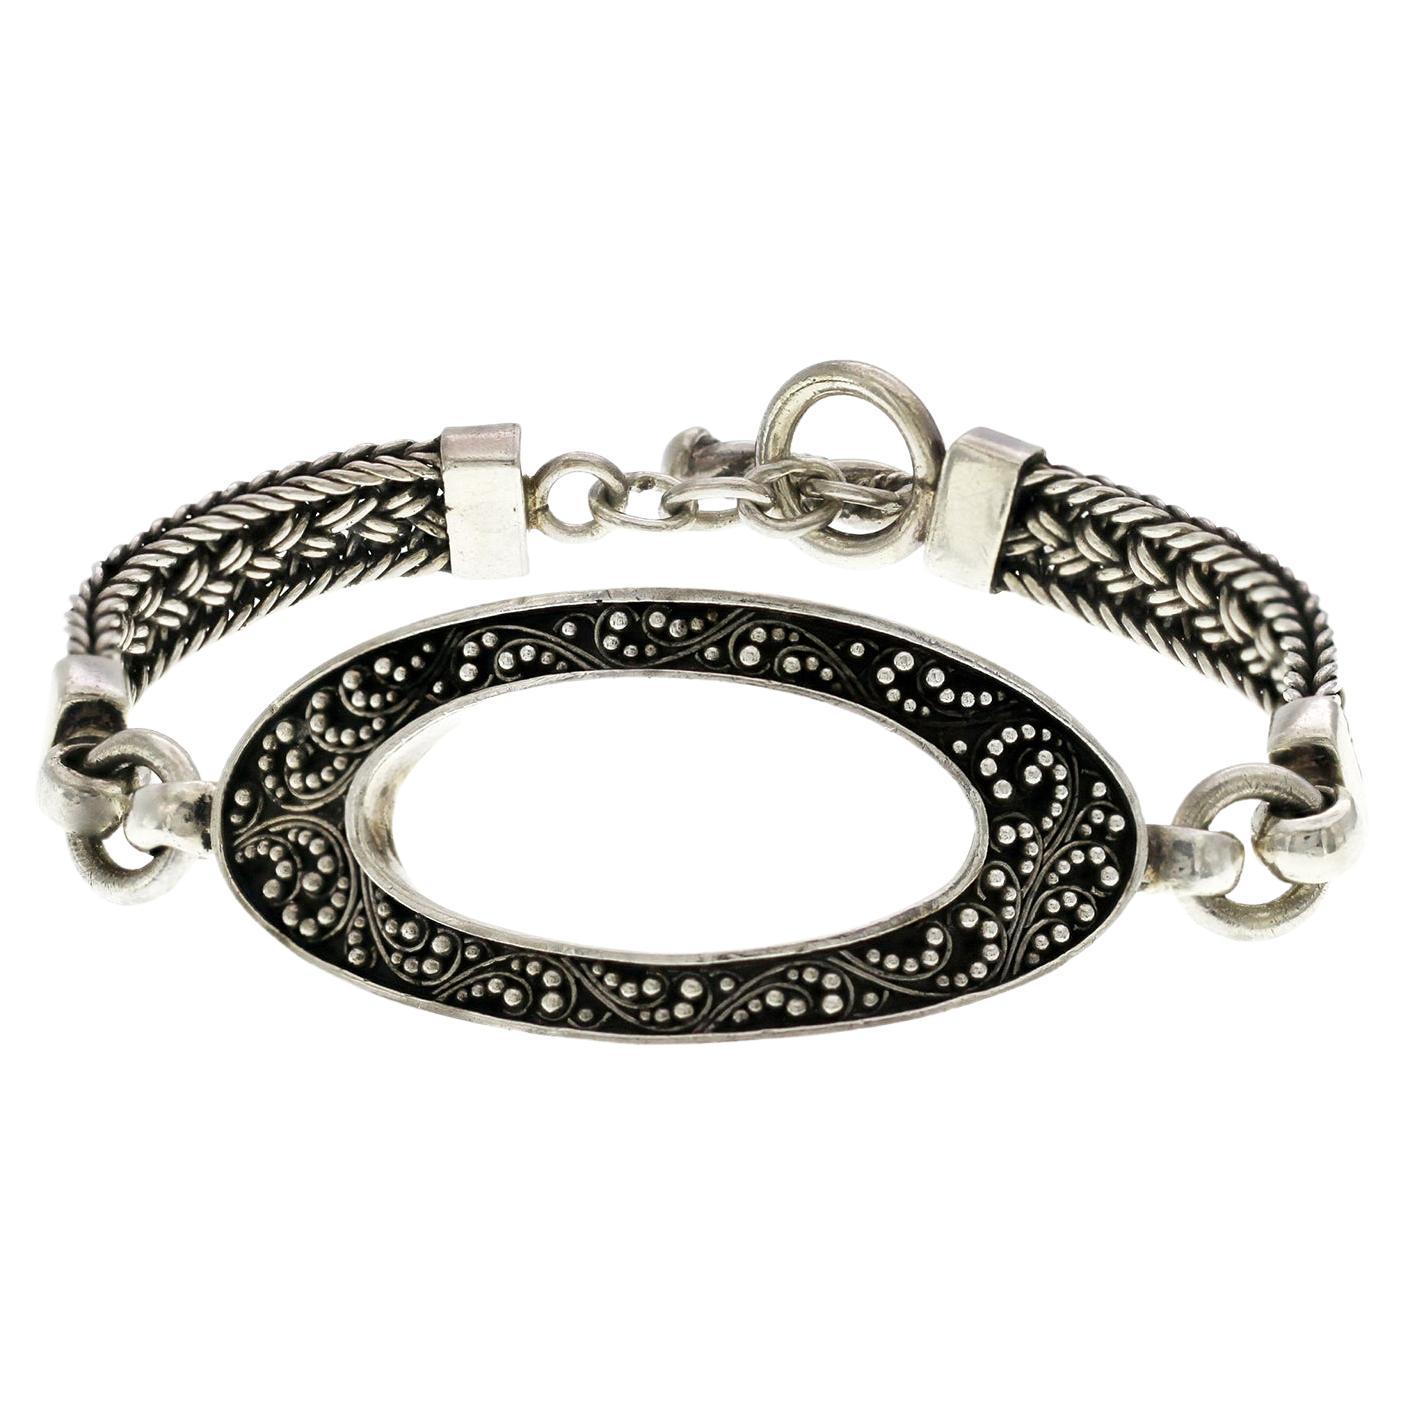 Lois Hill 925 Silver Woven Toggle Granulated Scroll Bracelet